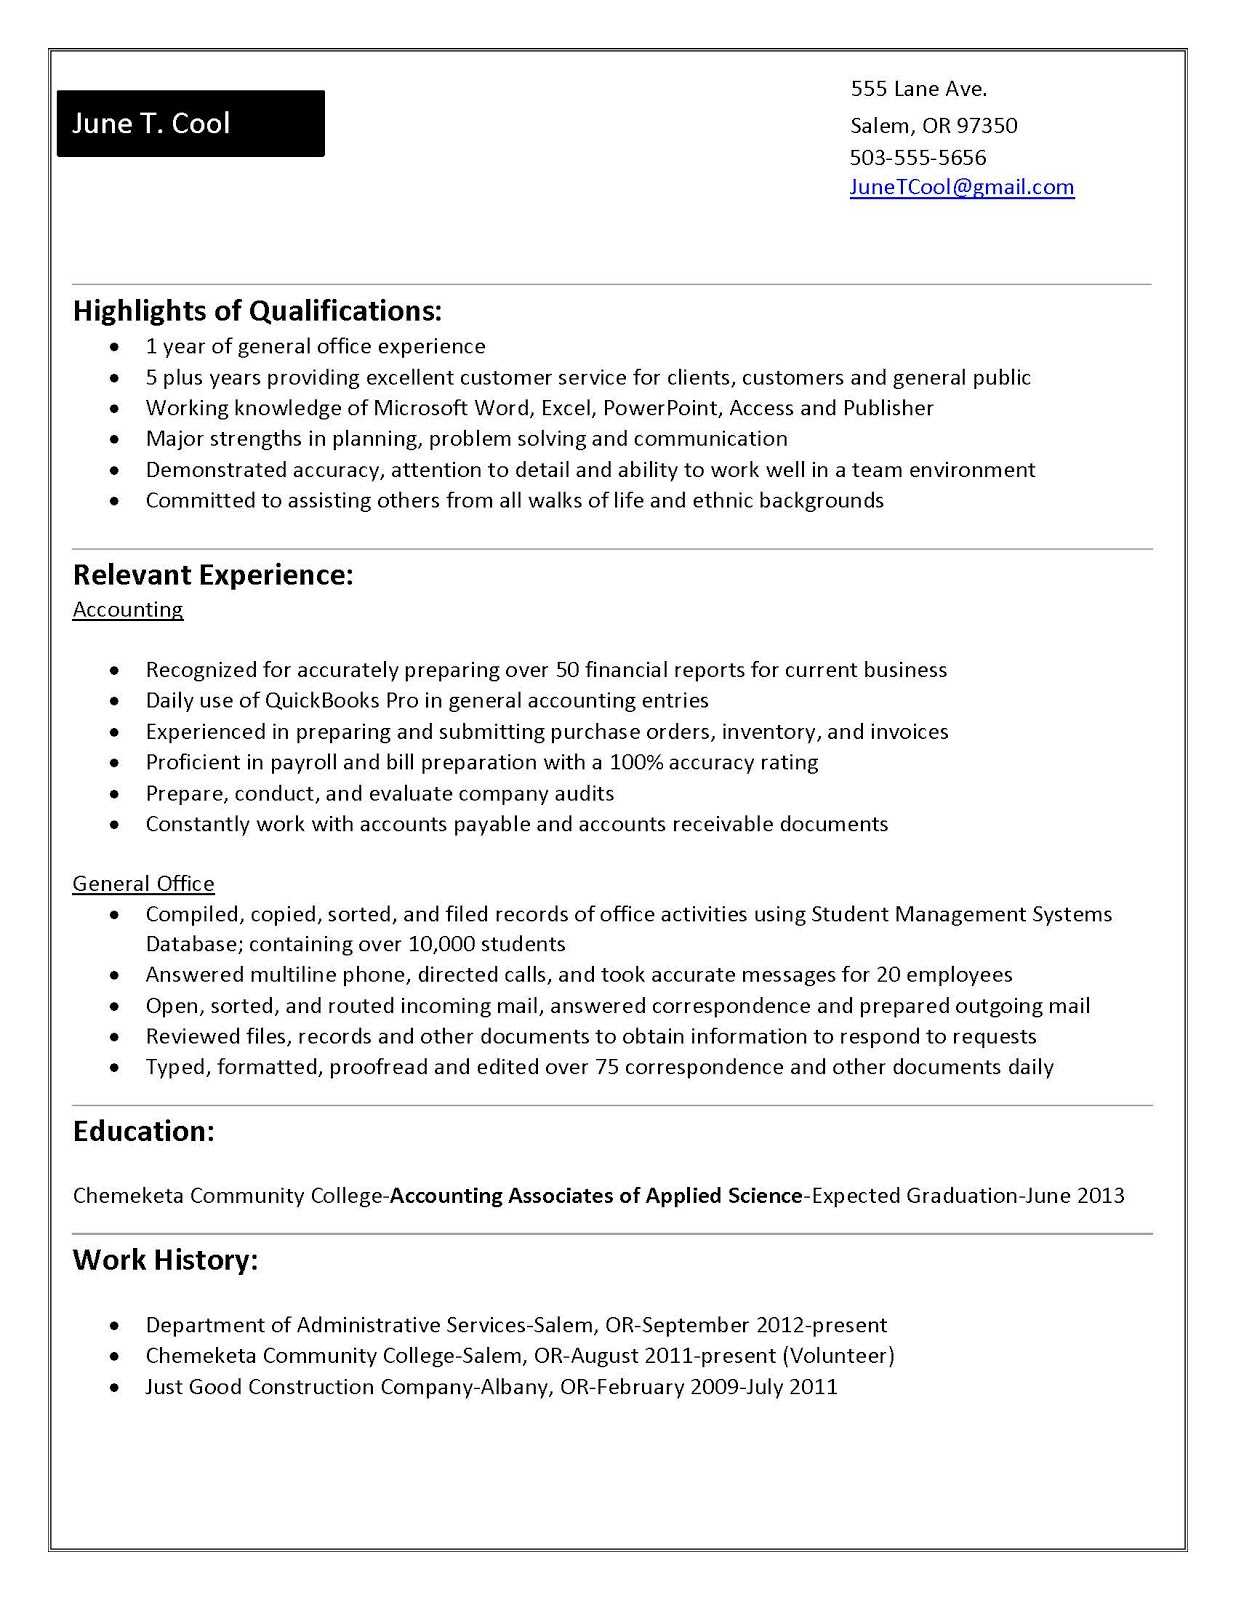 Accounting Functional Resume: College Student Resume Intended For College Student Resume Template Microsoft Word